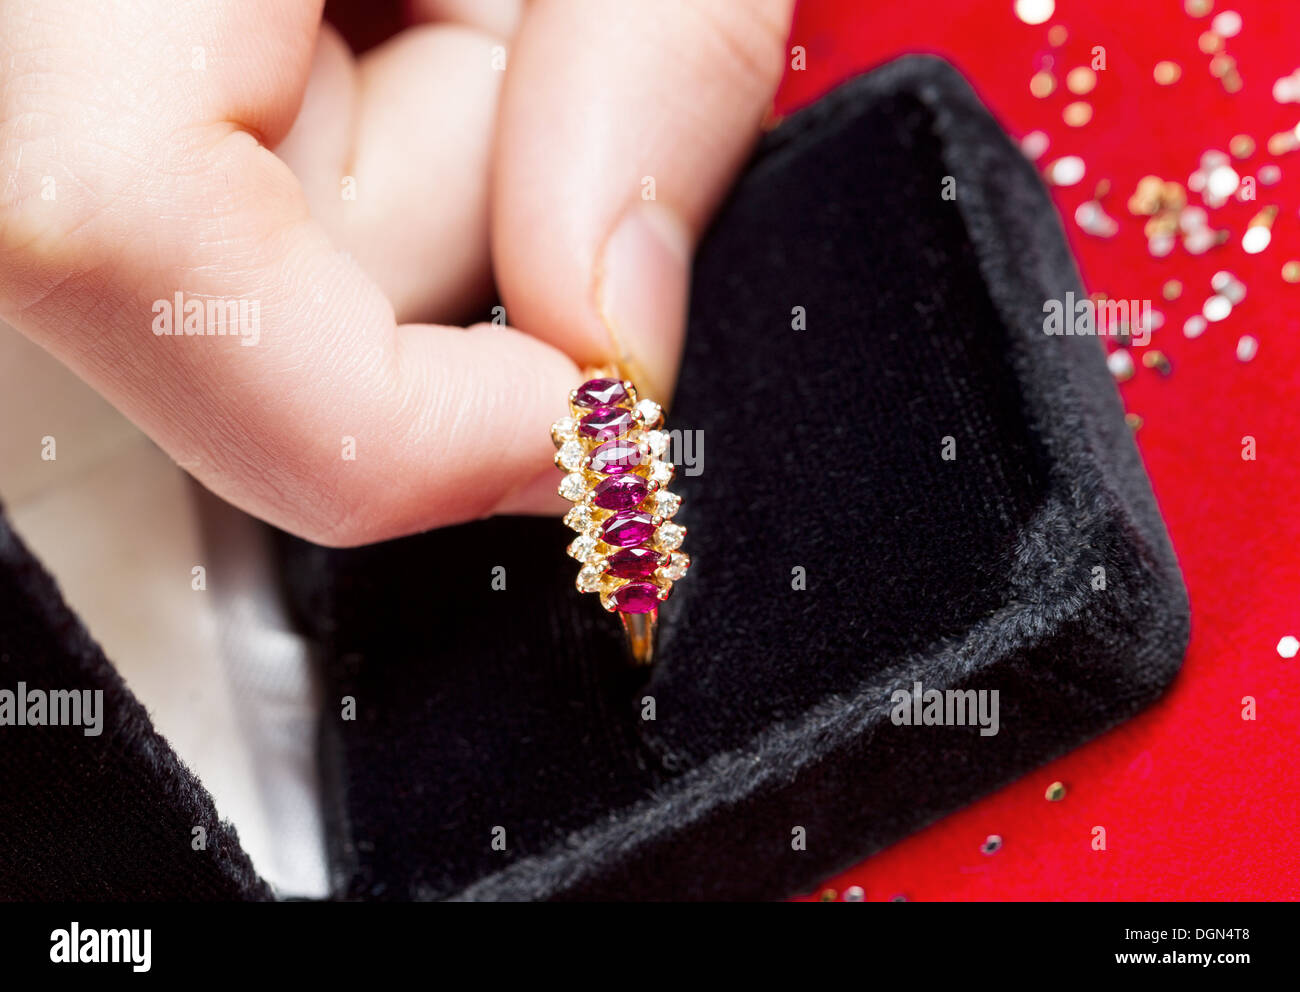 Female hand with a diamond ring in her finger,Sweden Stock Photo - Alamy